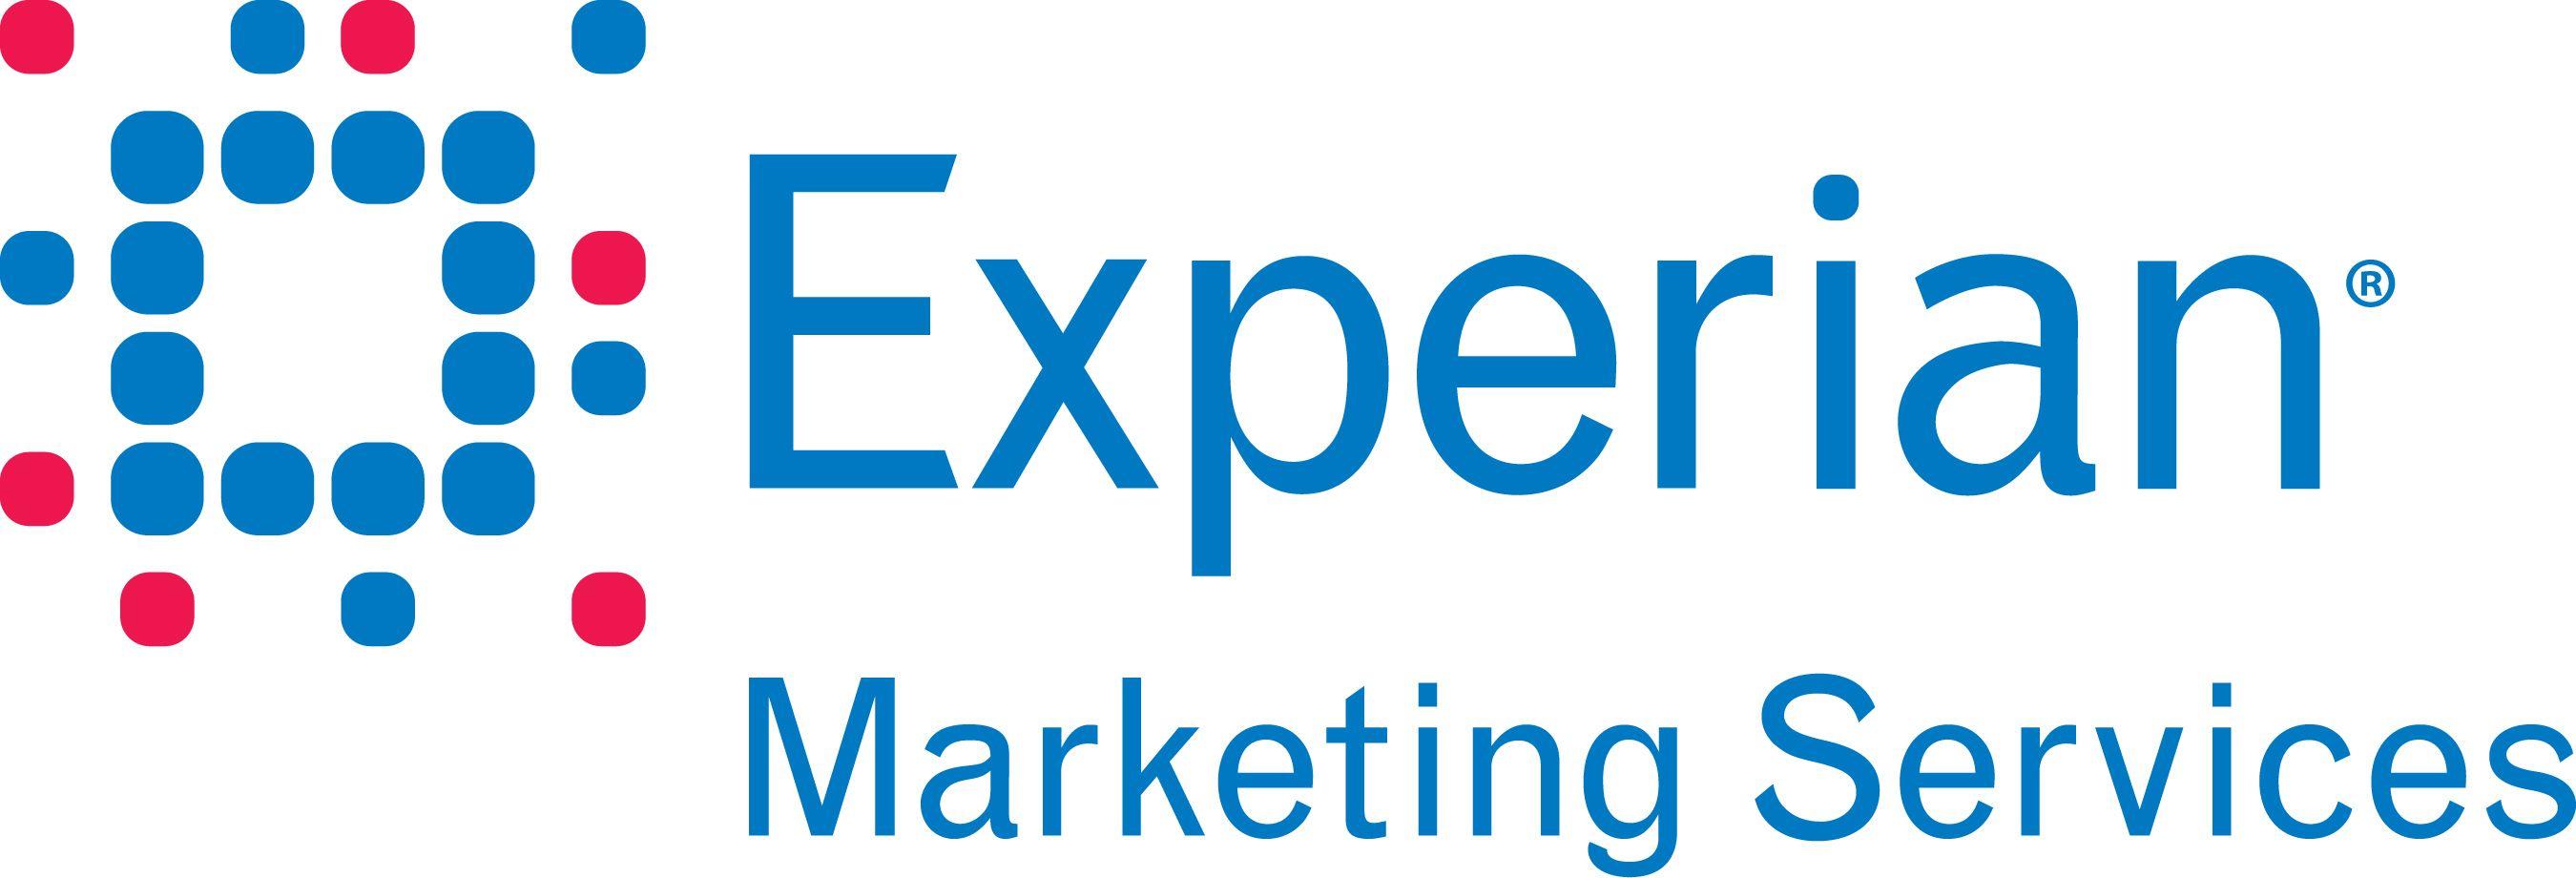 Marketing Service Logo - Experian is the top Email Service Provider in The Marketer ...